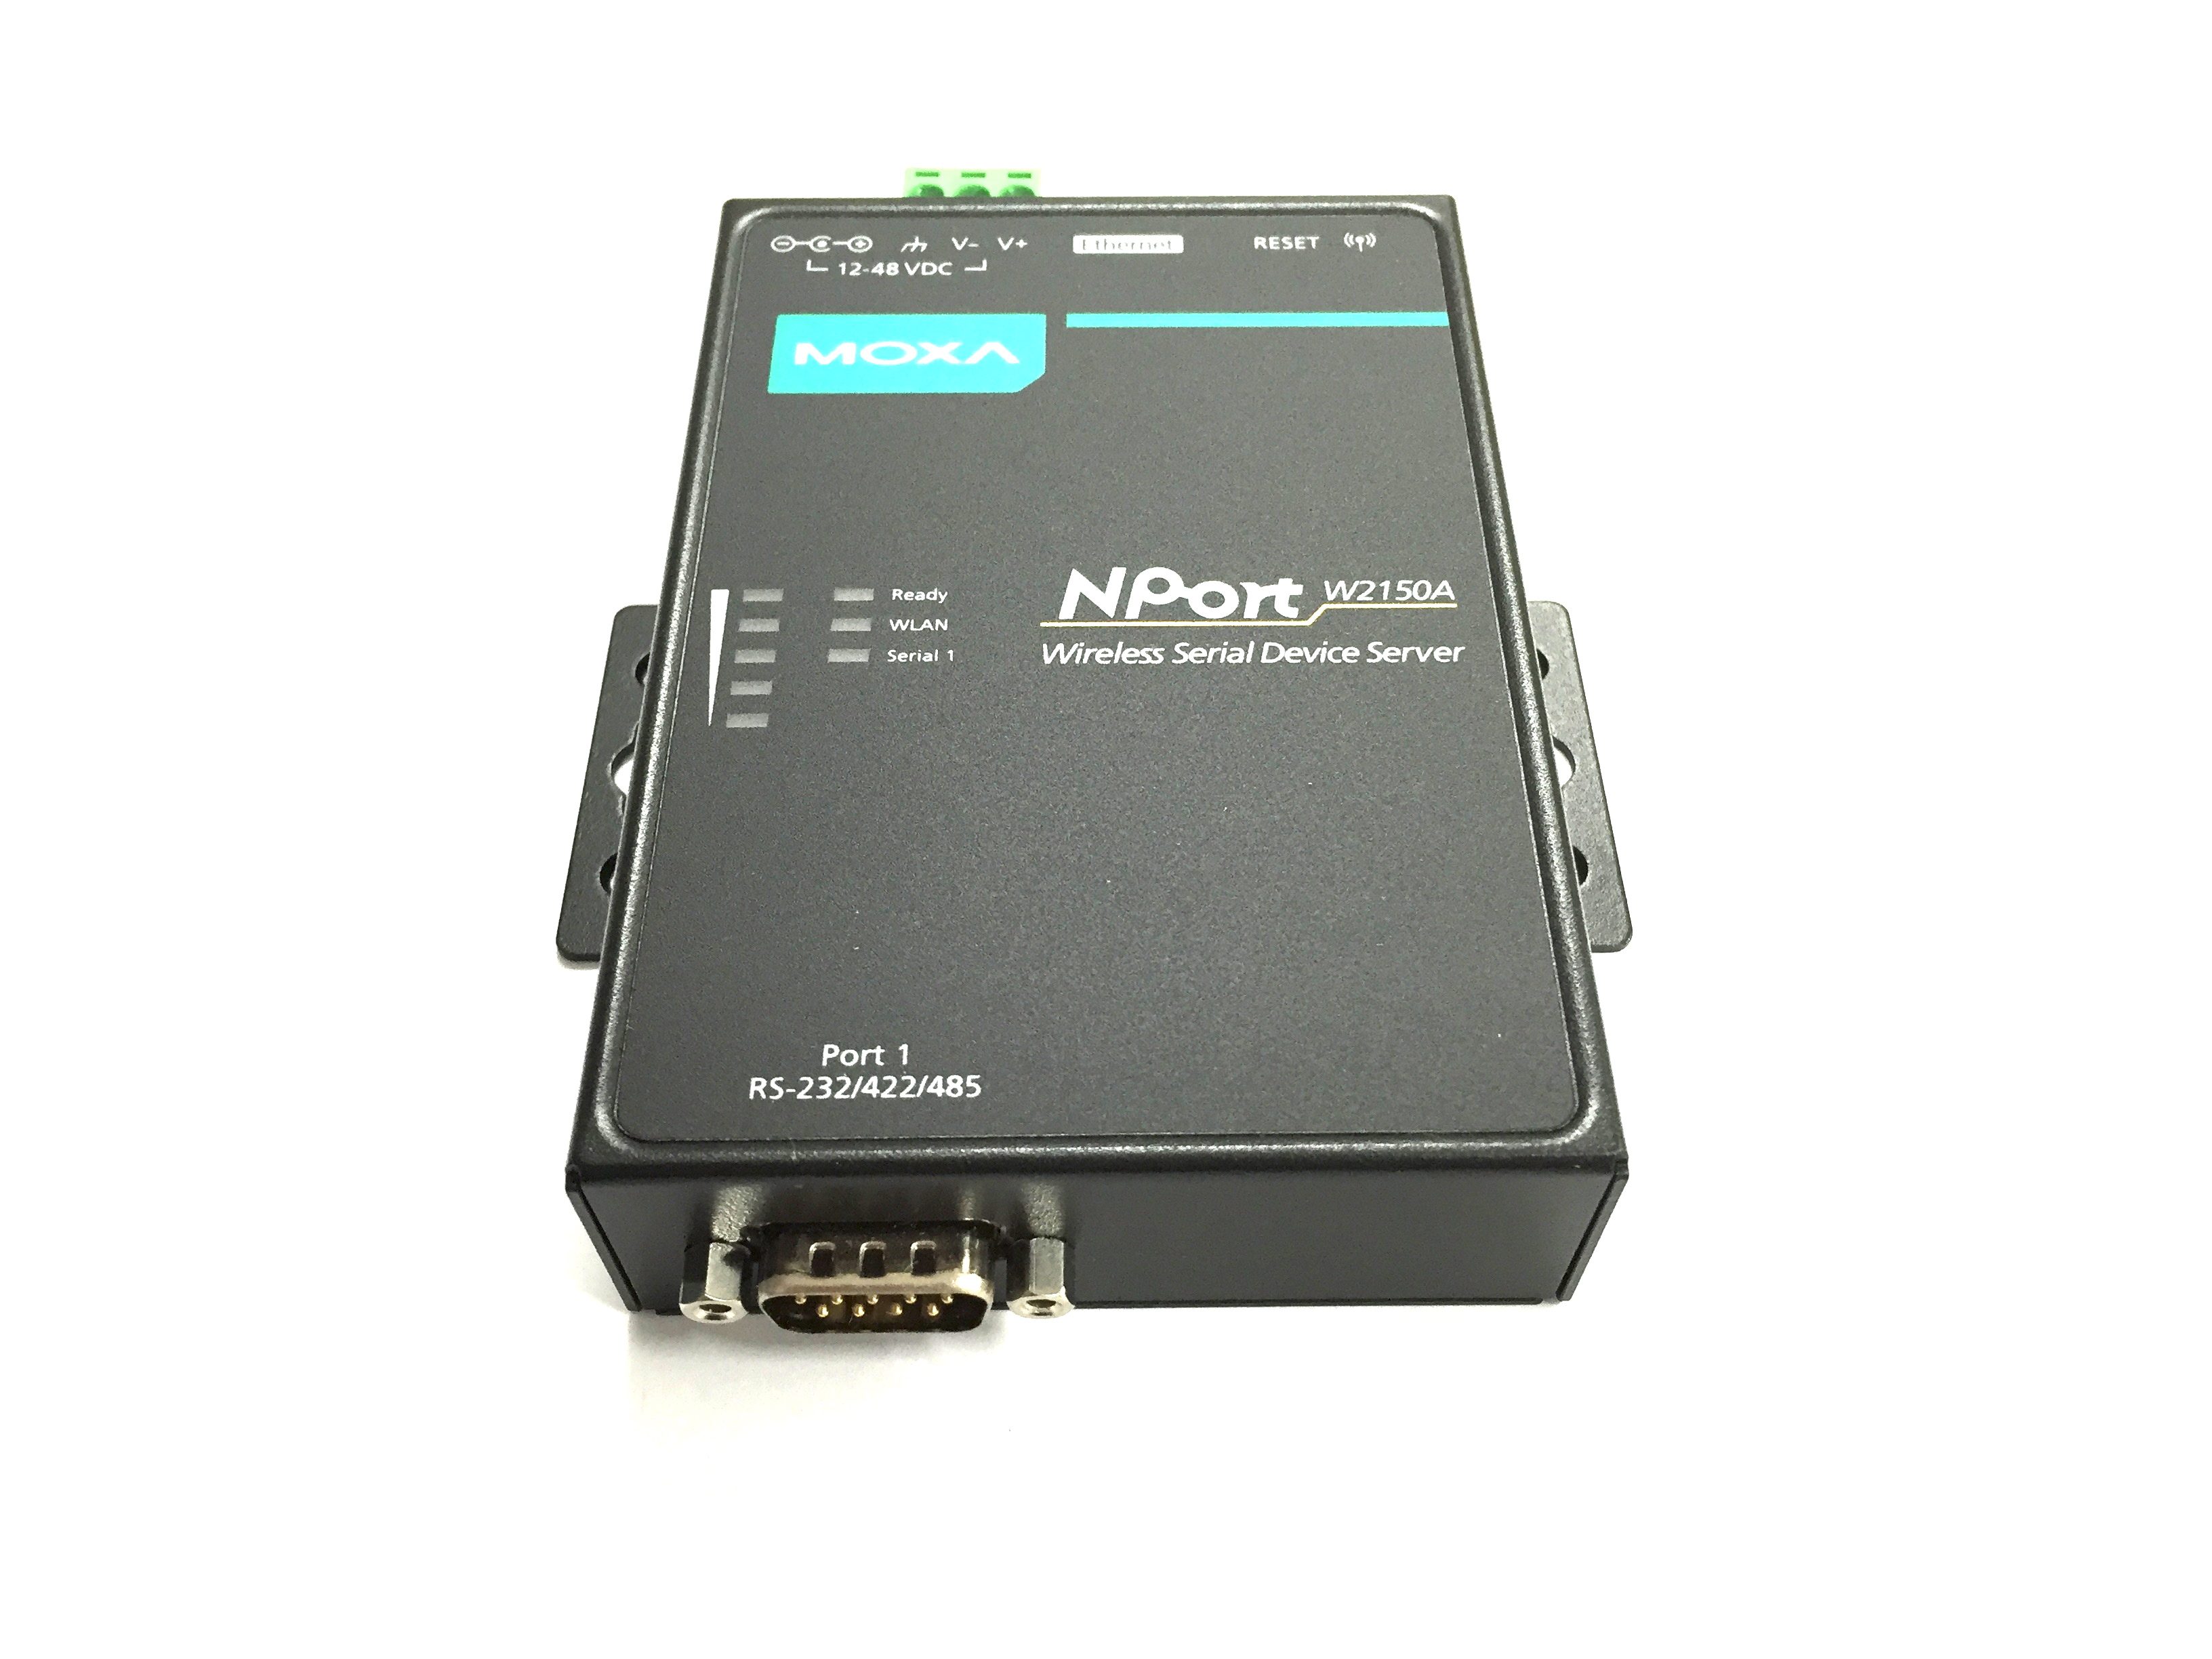 NPort W2150A